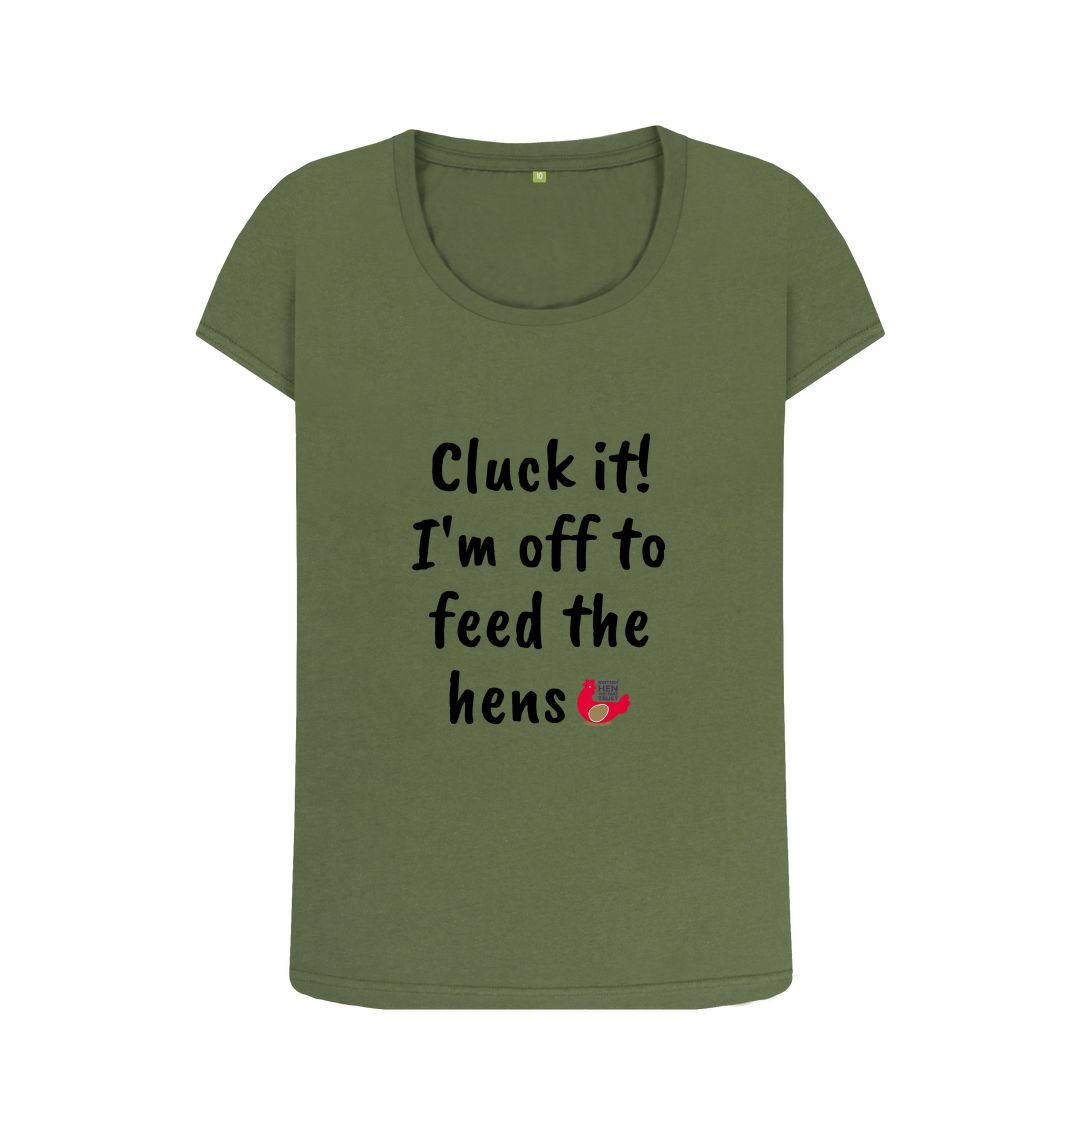 Khaki Cluck it! I'm off to feed the hens Top